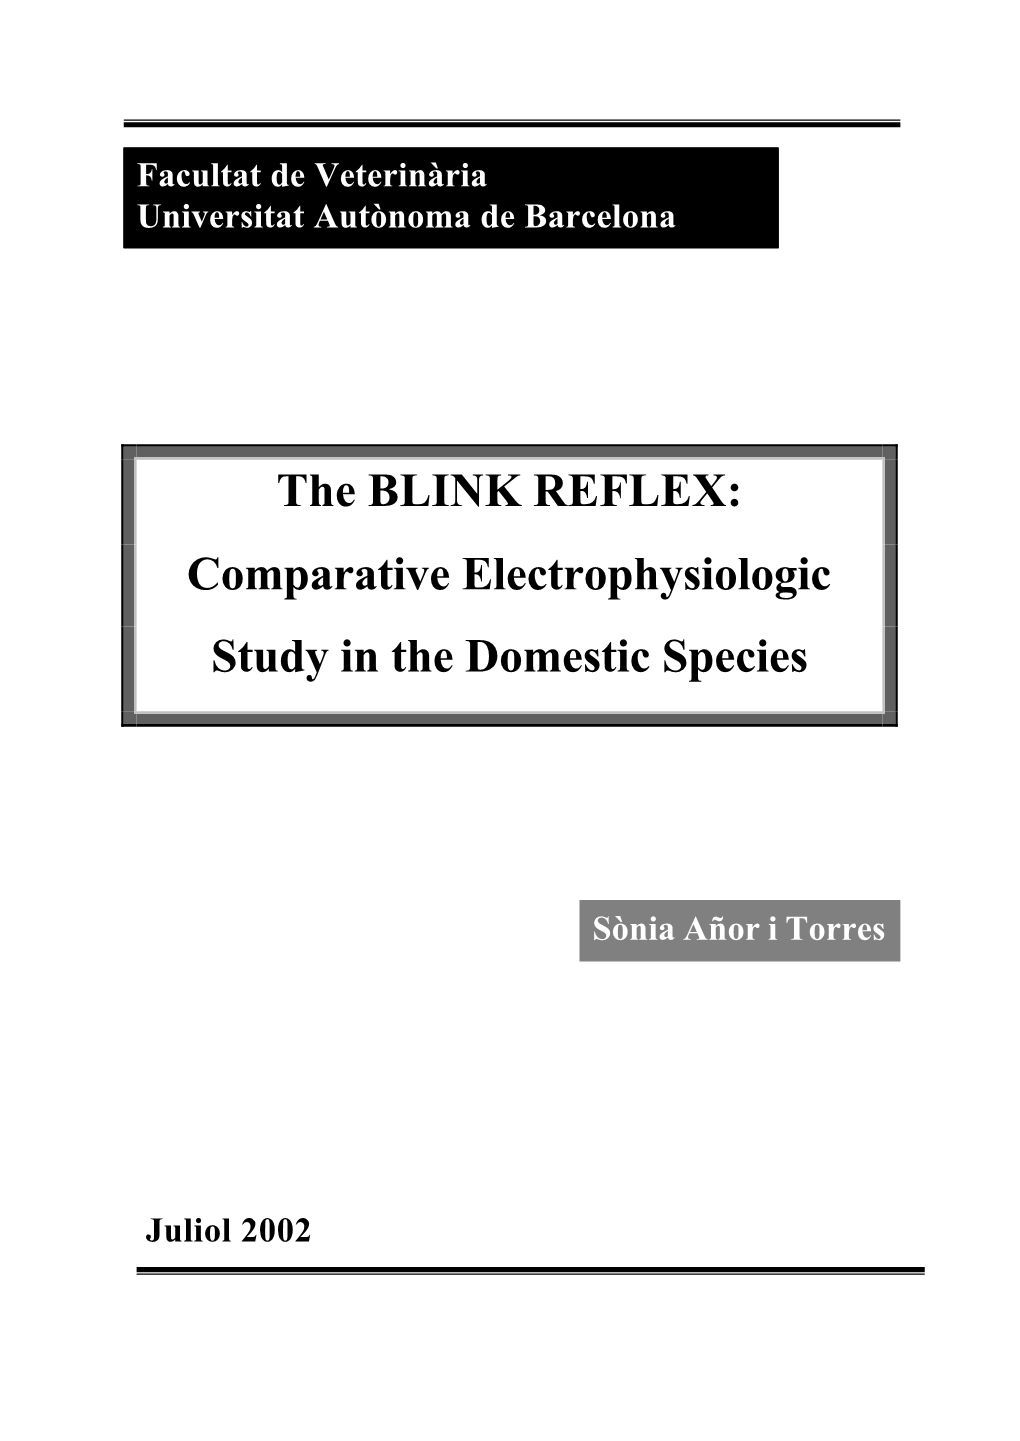 The BLINK REFLEX: Comparative Electrophysiologic Study in the Domestic Species